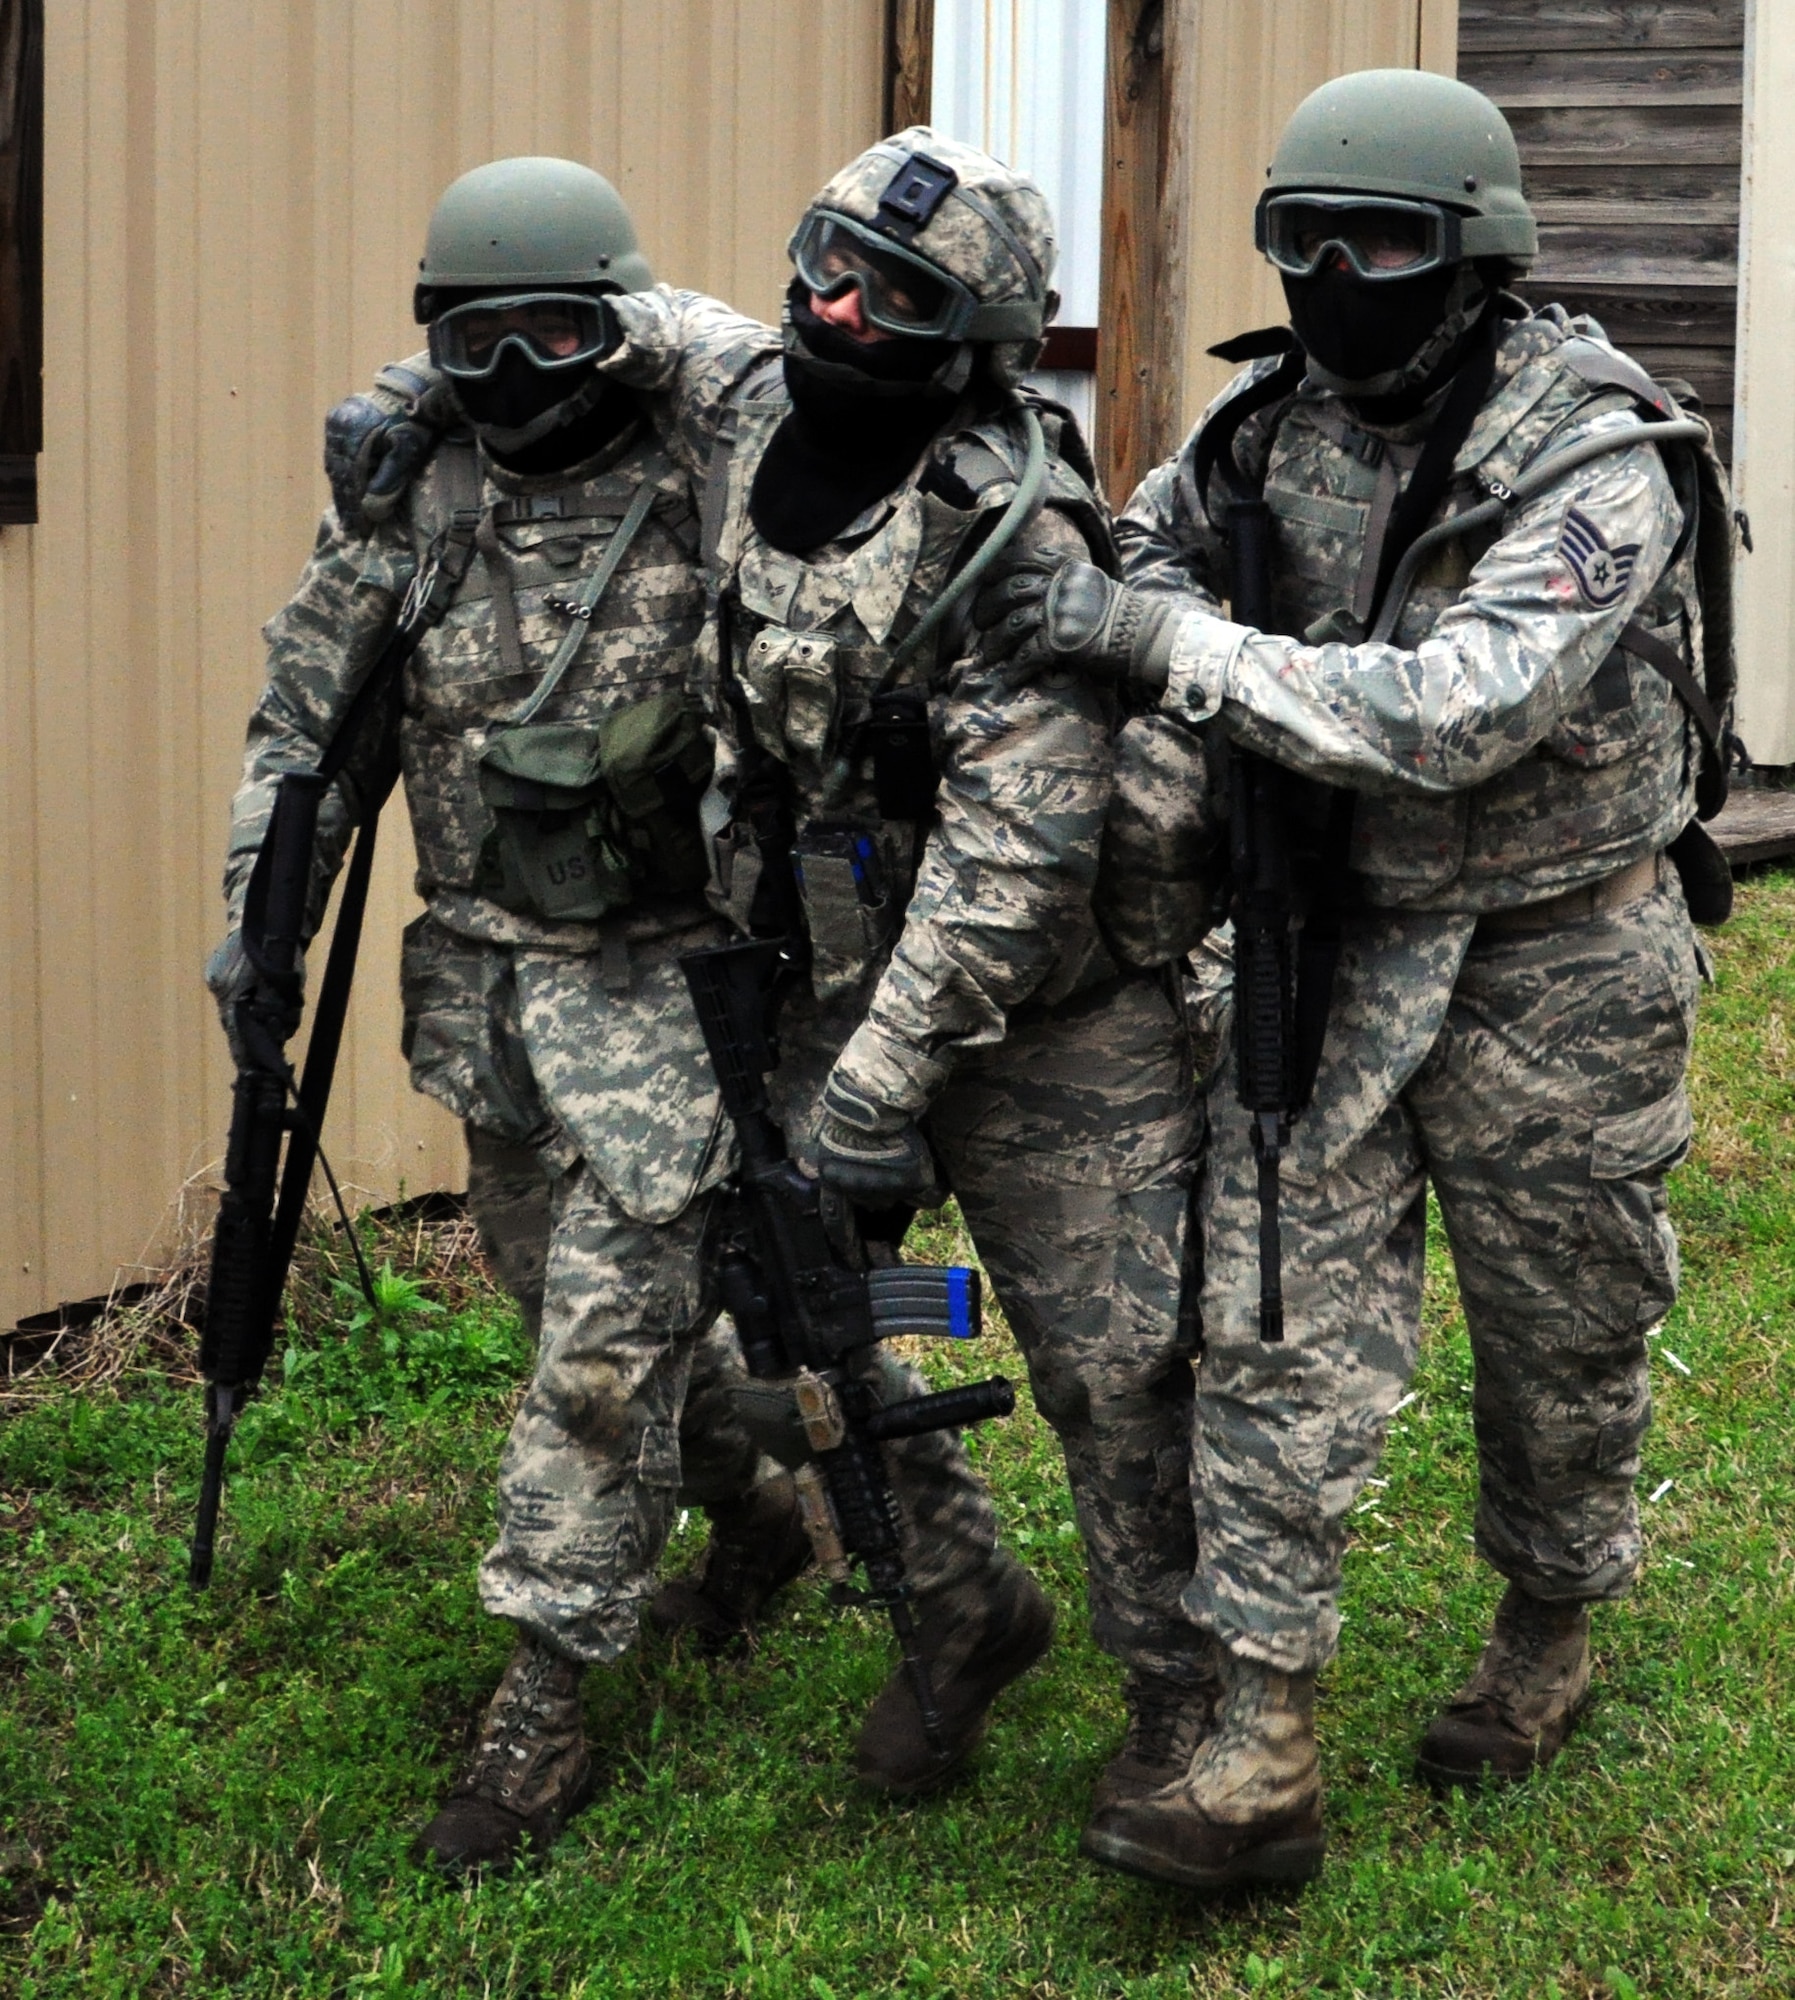 Members of the 931st Security Forces Squadron and 931st Civil Engineer Squadron assist a "wounded" Airman during a military operations on urban terrain (MOUT) exercise at Camp Gruber Training Center, Okla., April 15, 2015.  More than 80 members of the two squadrons participated in ten days of combat skills training at Camp Gruber, which included land navigation, weapons training, tactical movements, convoy operations, base defense, room clearing procedures, foot patrols, military operations on urban terrain (MOUT) and combat lifesaving.  (U.S. Air Force photo by Capt. Zach Anderson)
